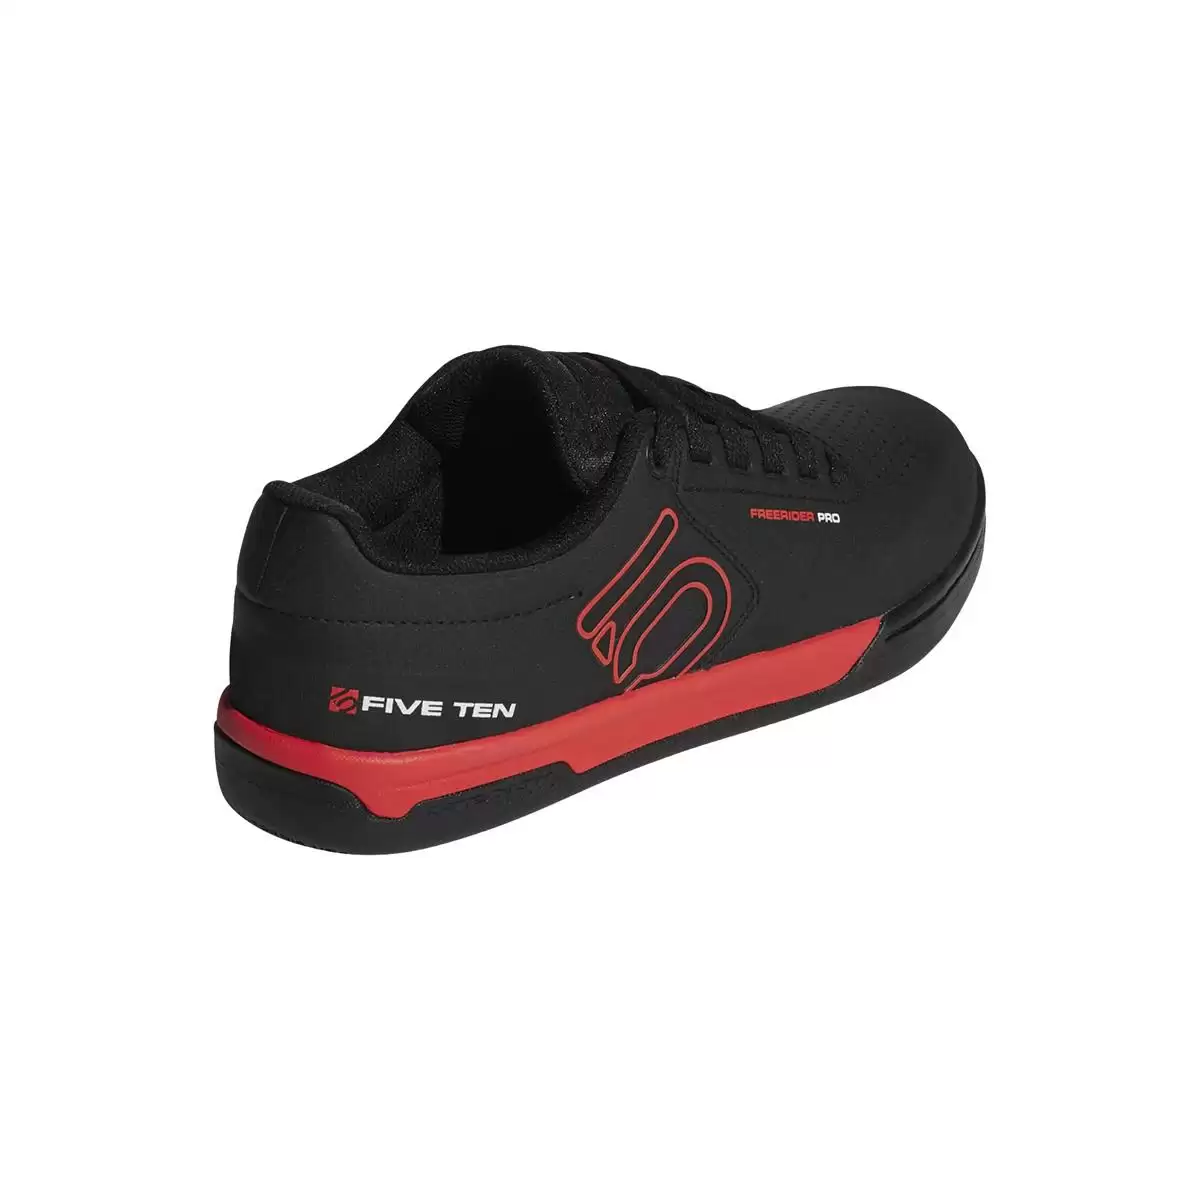 MTB Flat Shoes Freerider Pro Black/Red Size 41 #2